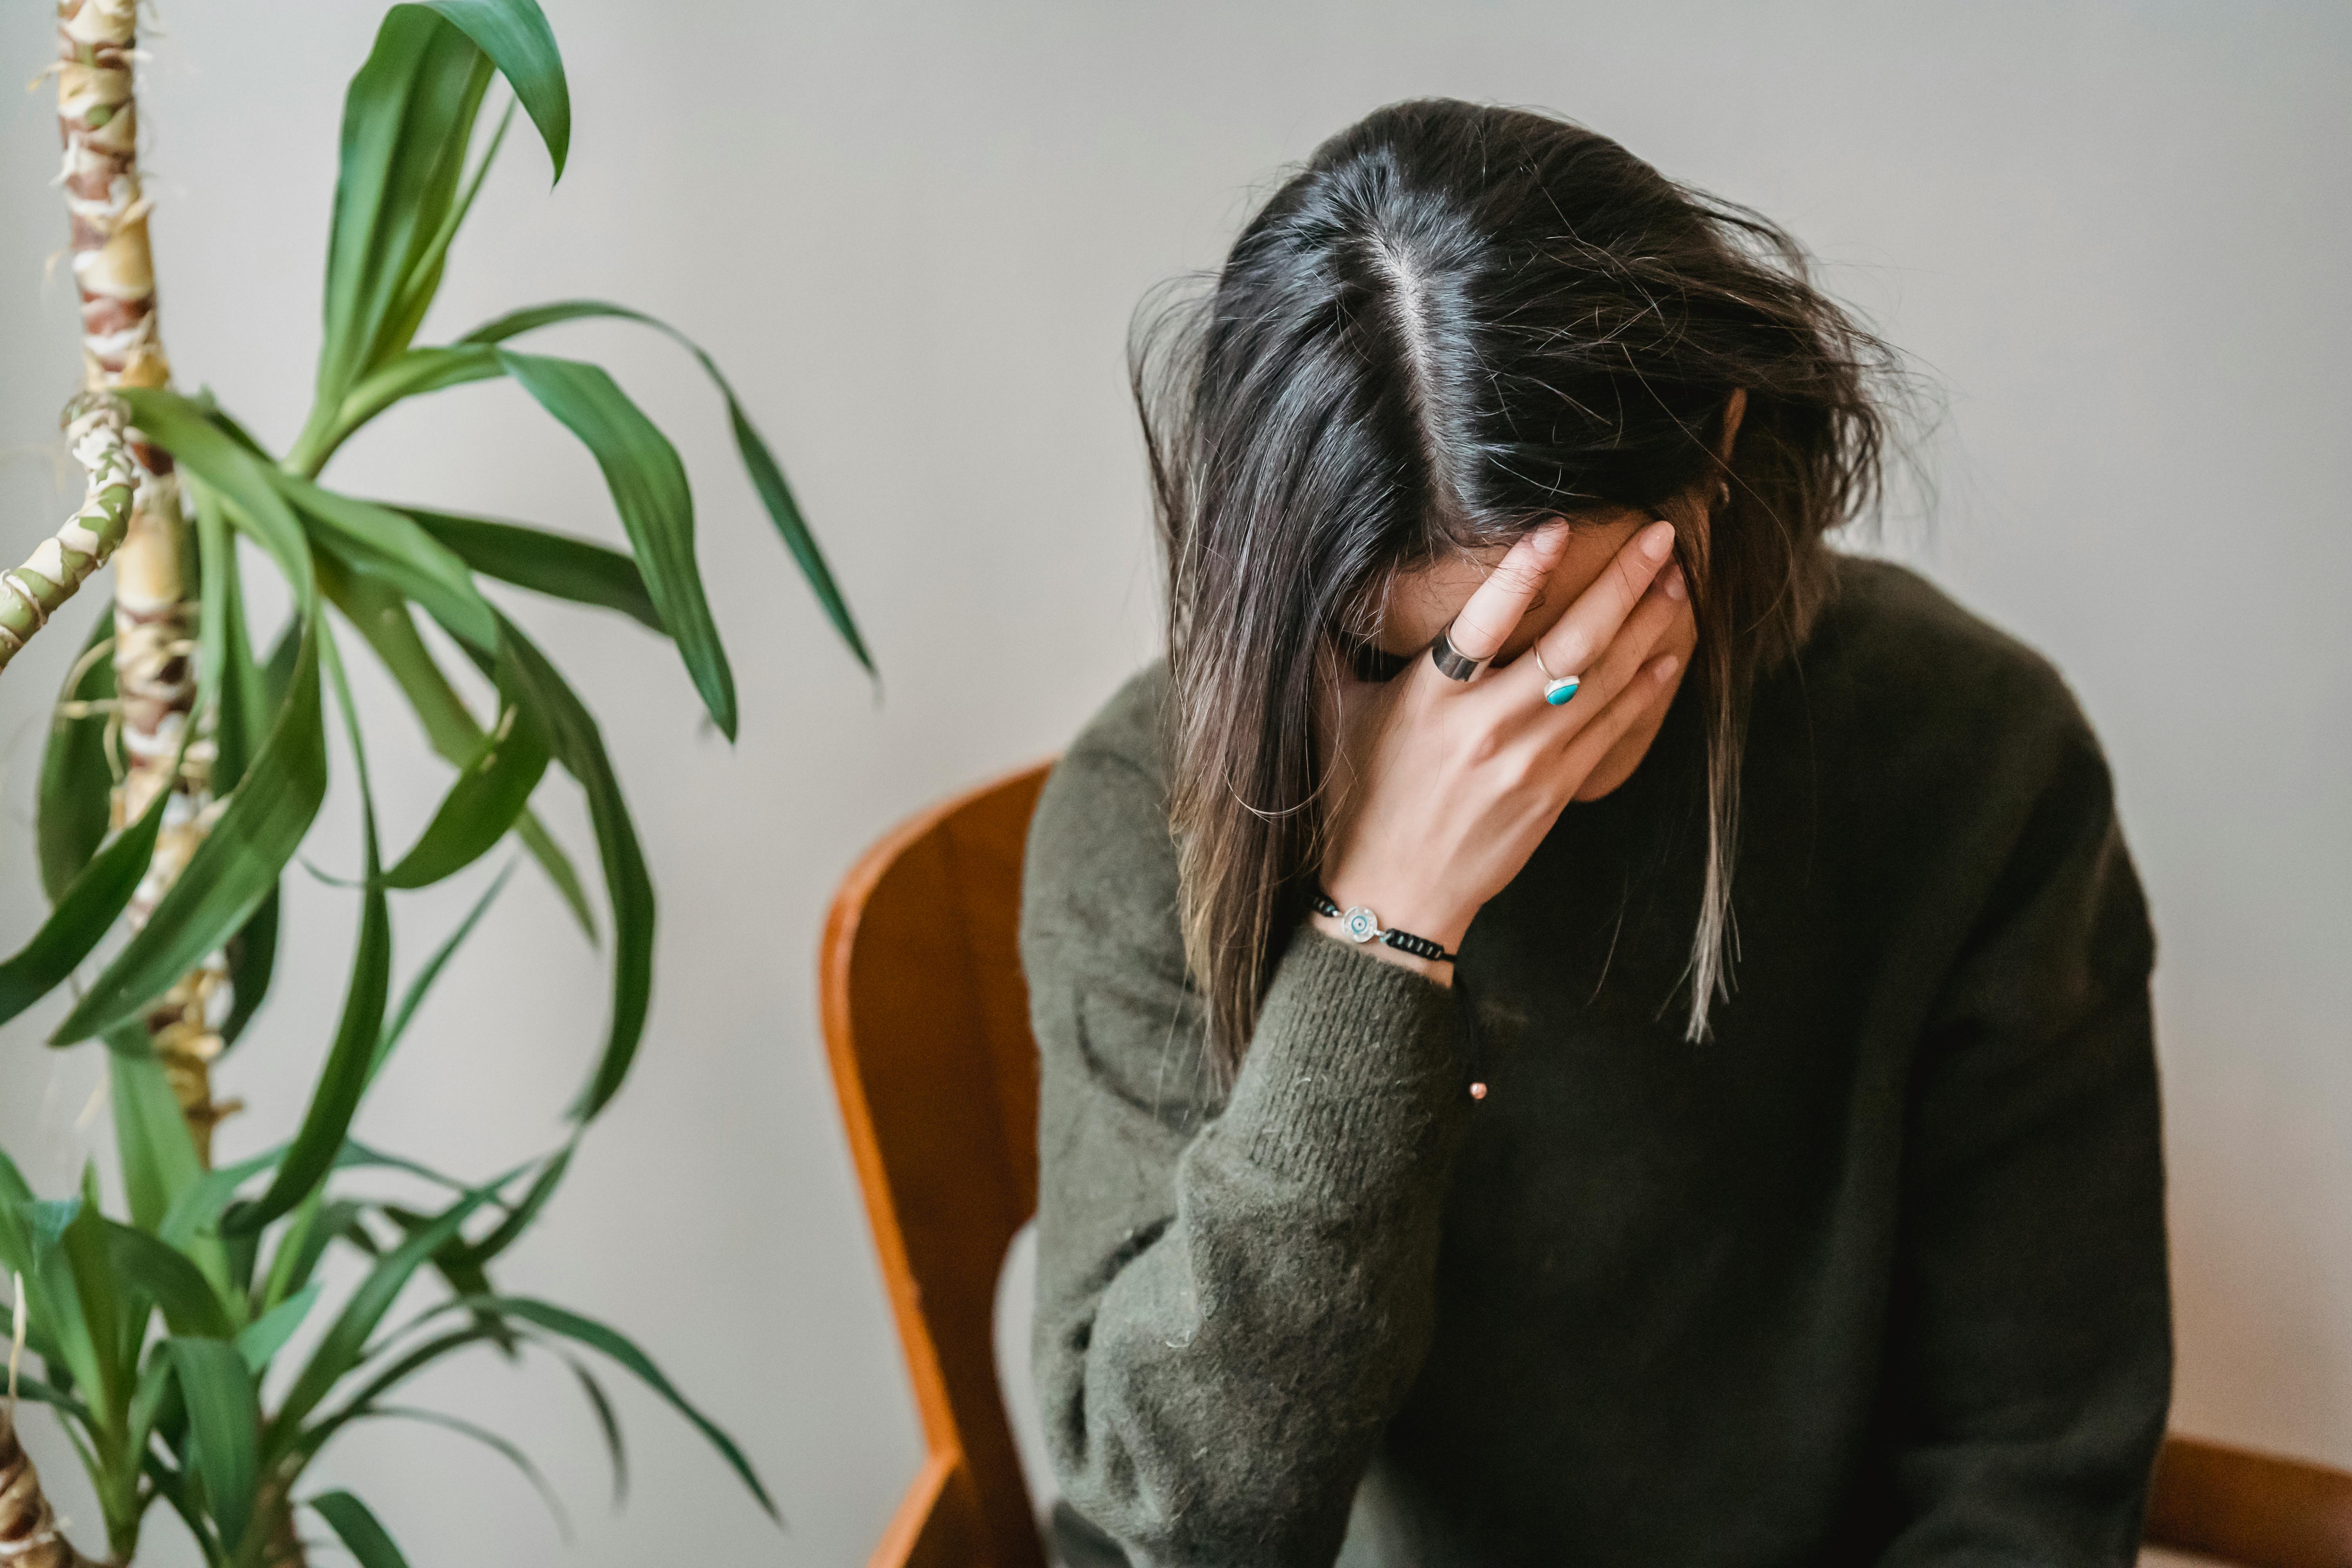 An upset young woman covering her face with her hand | Source: Pexels